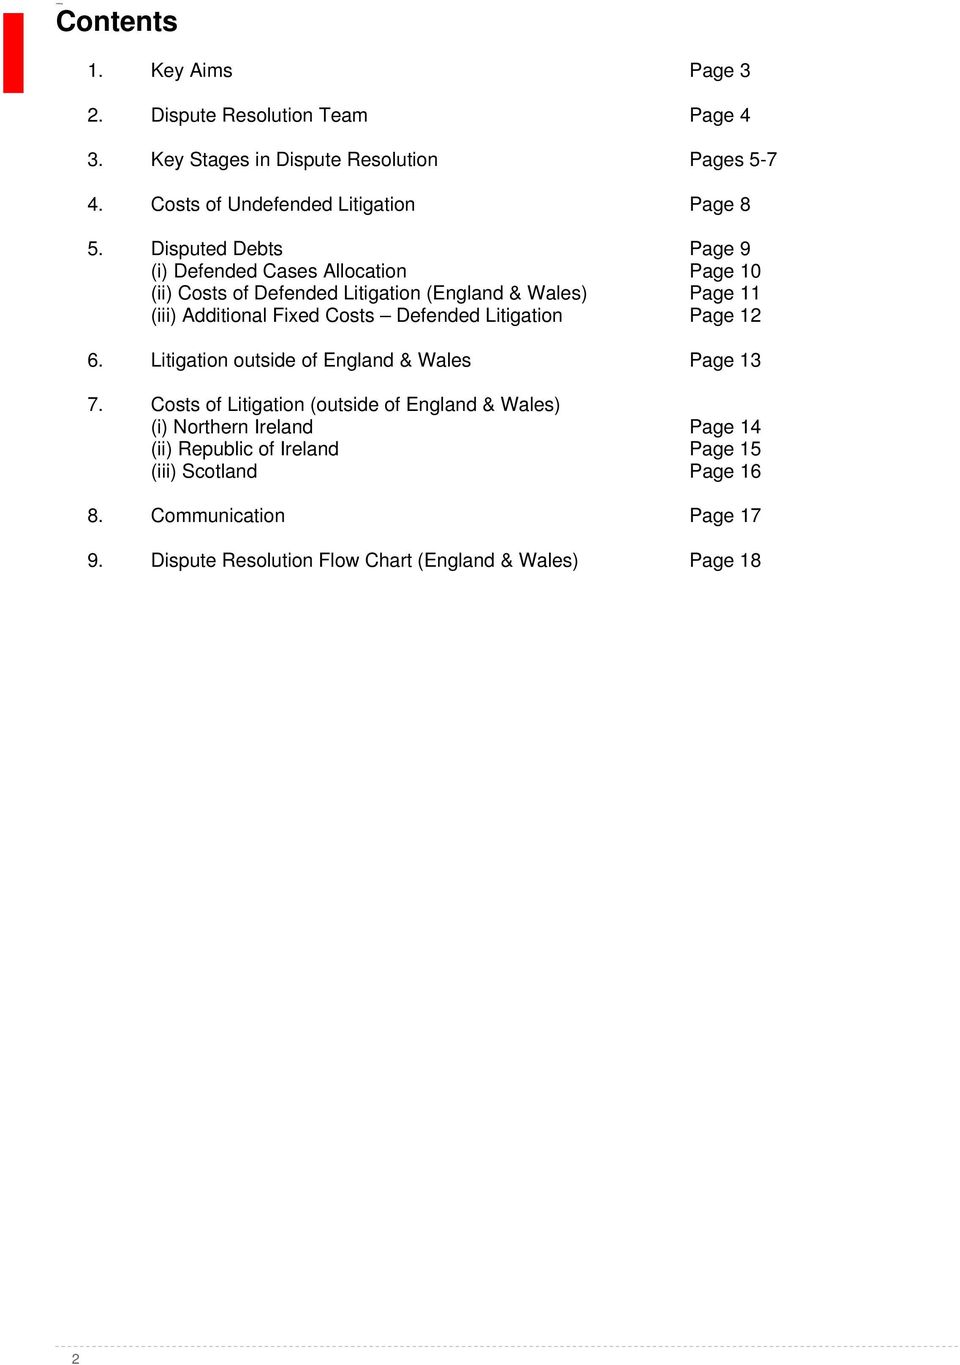 Disputed Debts Page 9 (i) Defended Cases Allocation Page 10 (ii) Costs of Defended Litigation (England & Wales) Page 11 (iii) Additional Fixed Costs